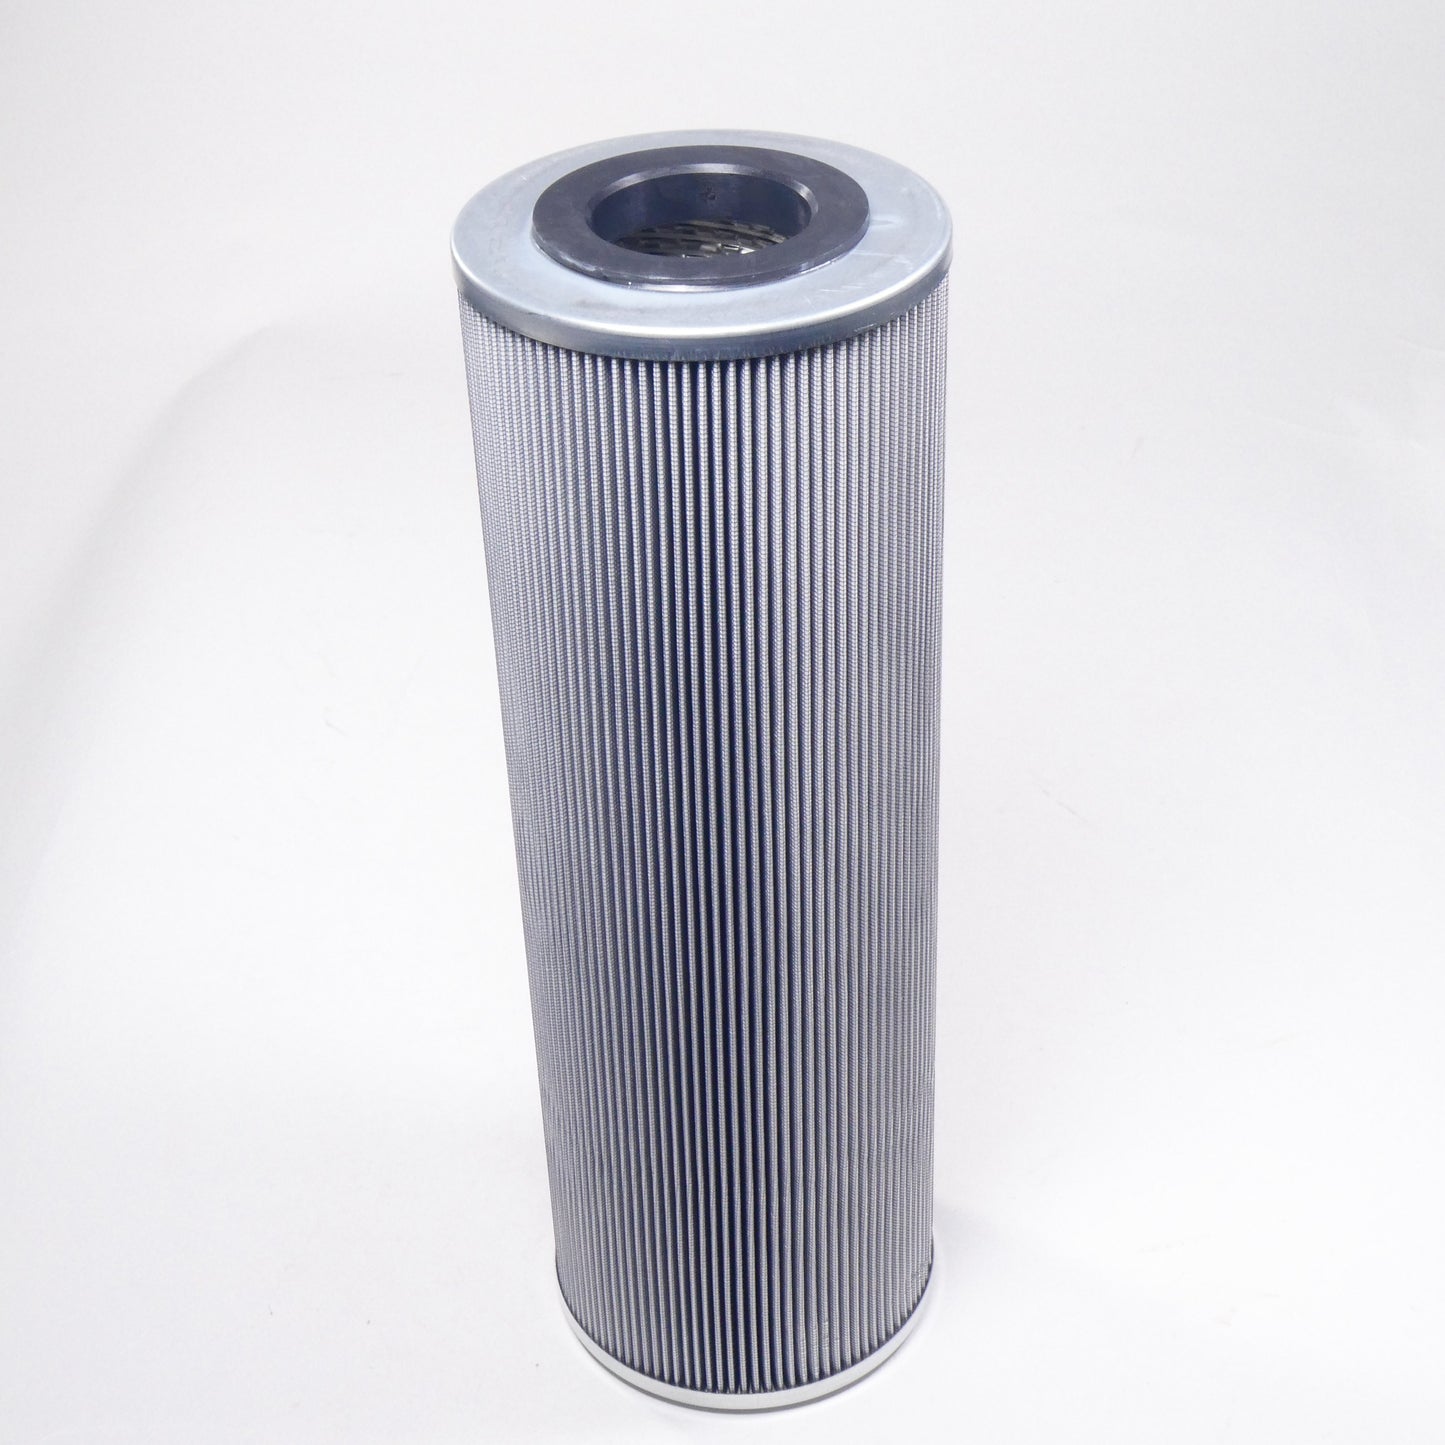 Hydrafil Replacement Filter Element for Hilco PL718-10-CNN